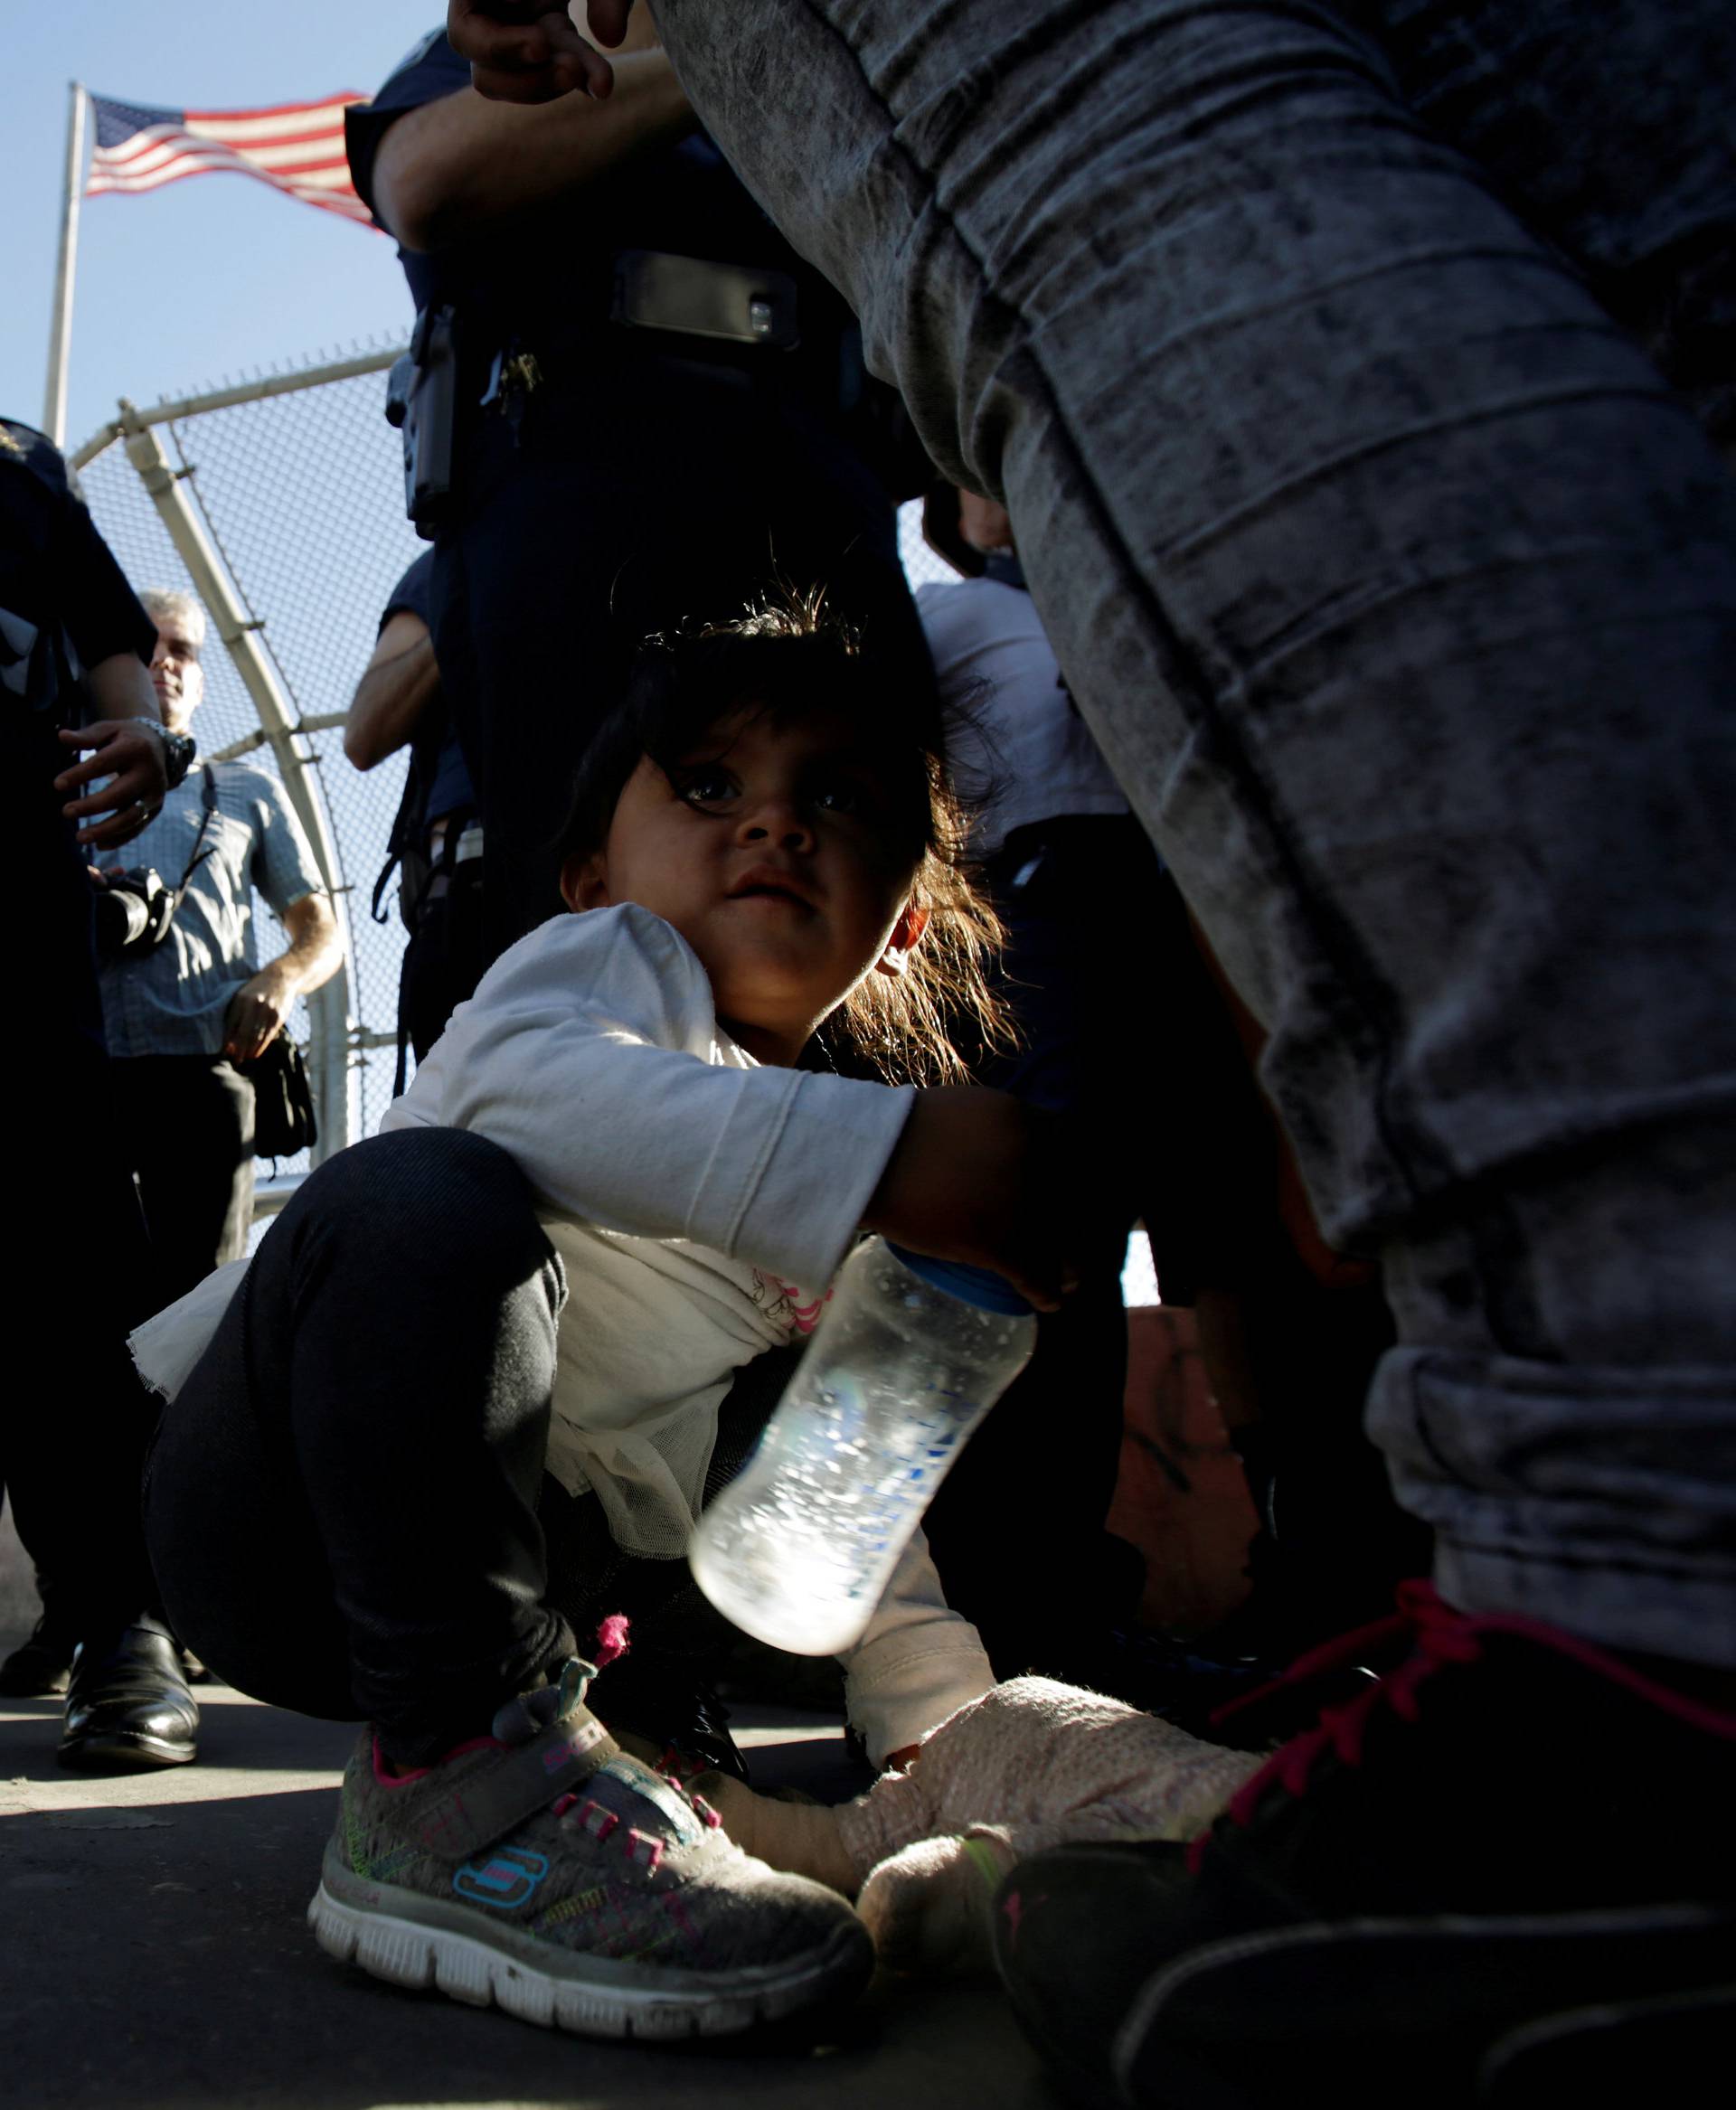 Migrant families from Mexico listen to officers of the U.S. Customs and Border Protection before entering the United States to apply for asylum at Paso del Norte international border crossing bridge in Ciudad Juarez